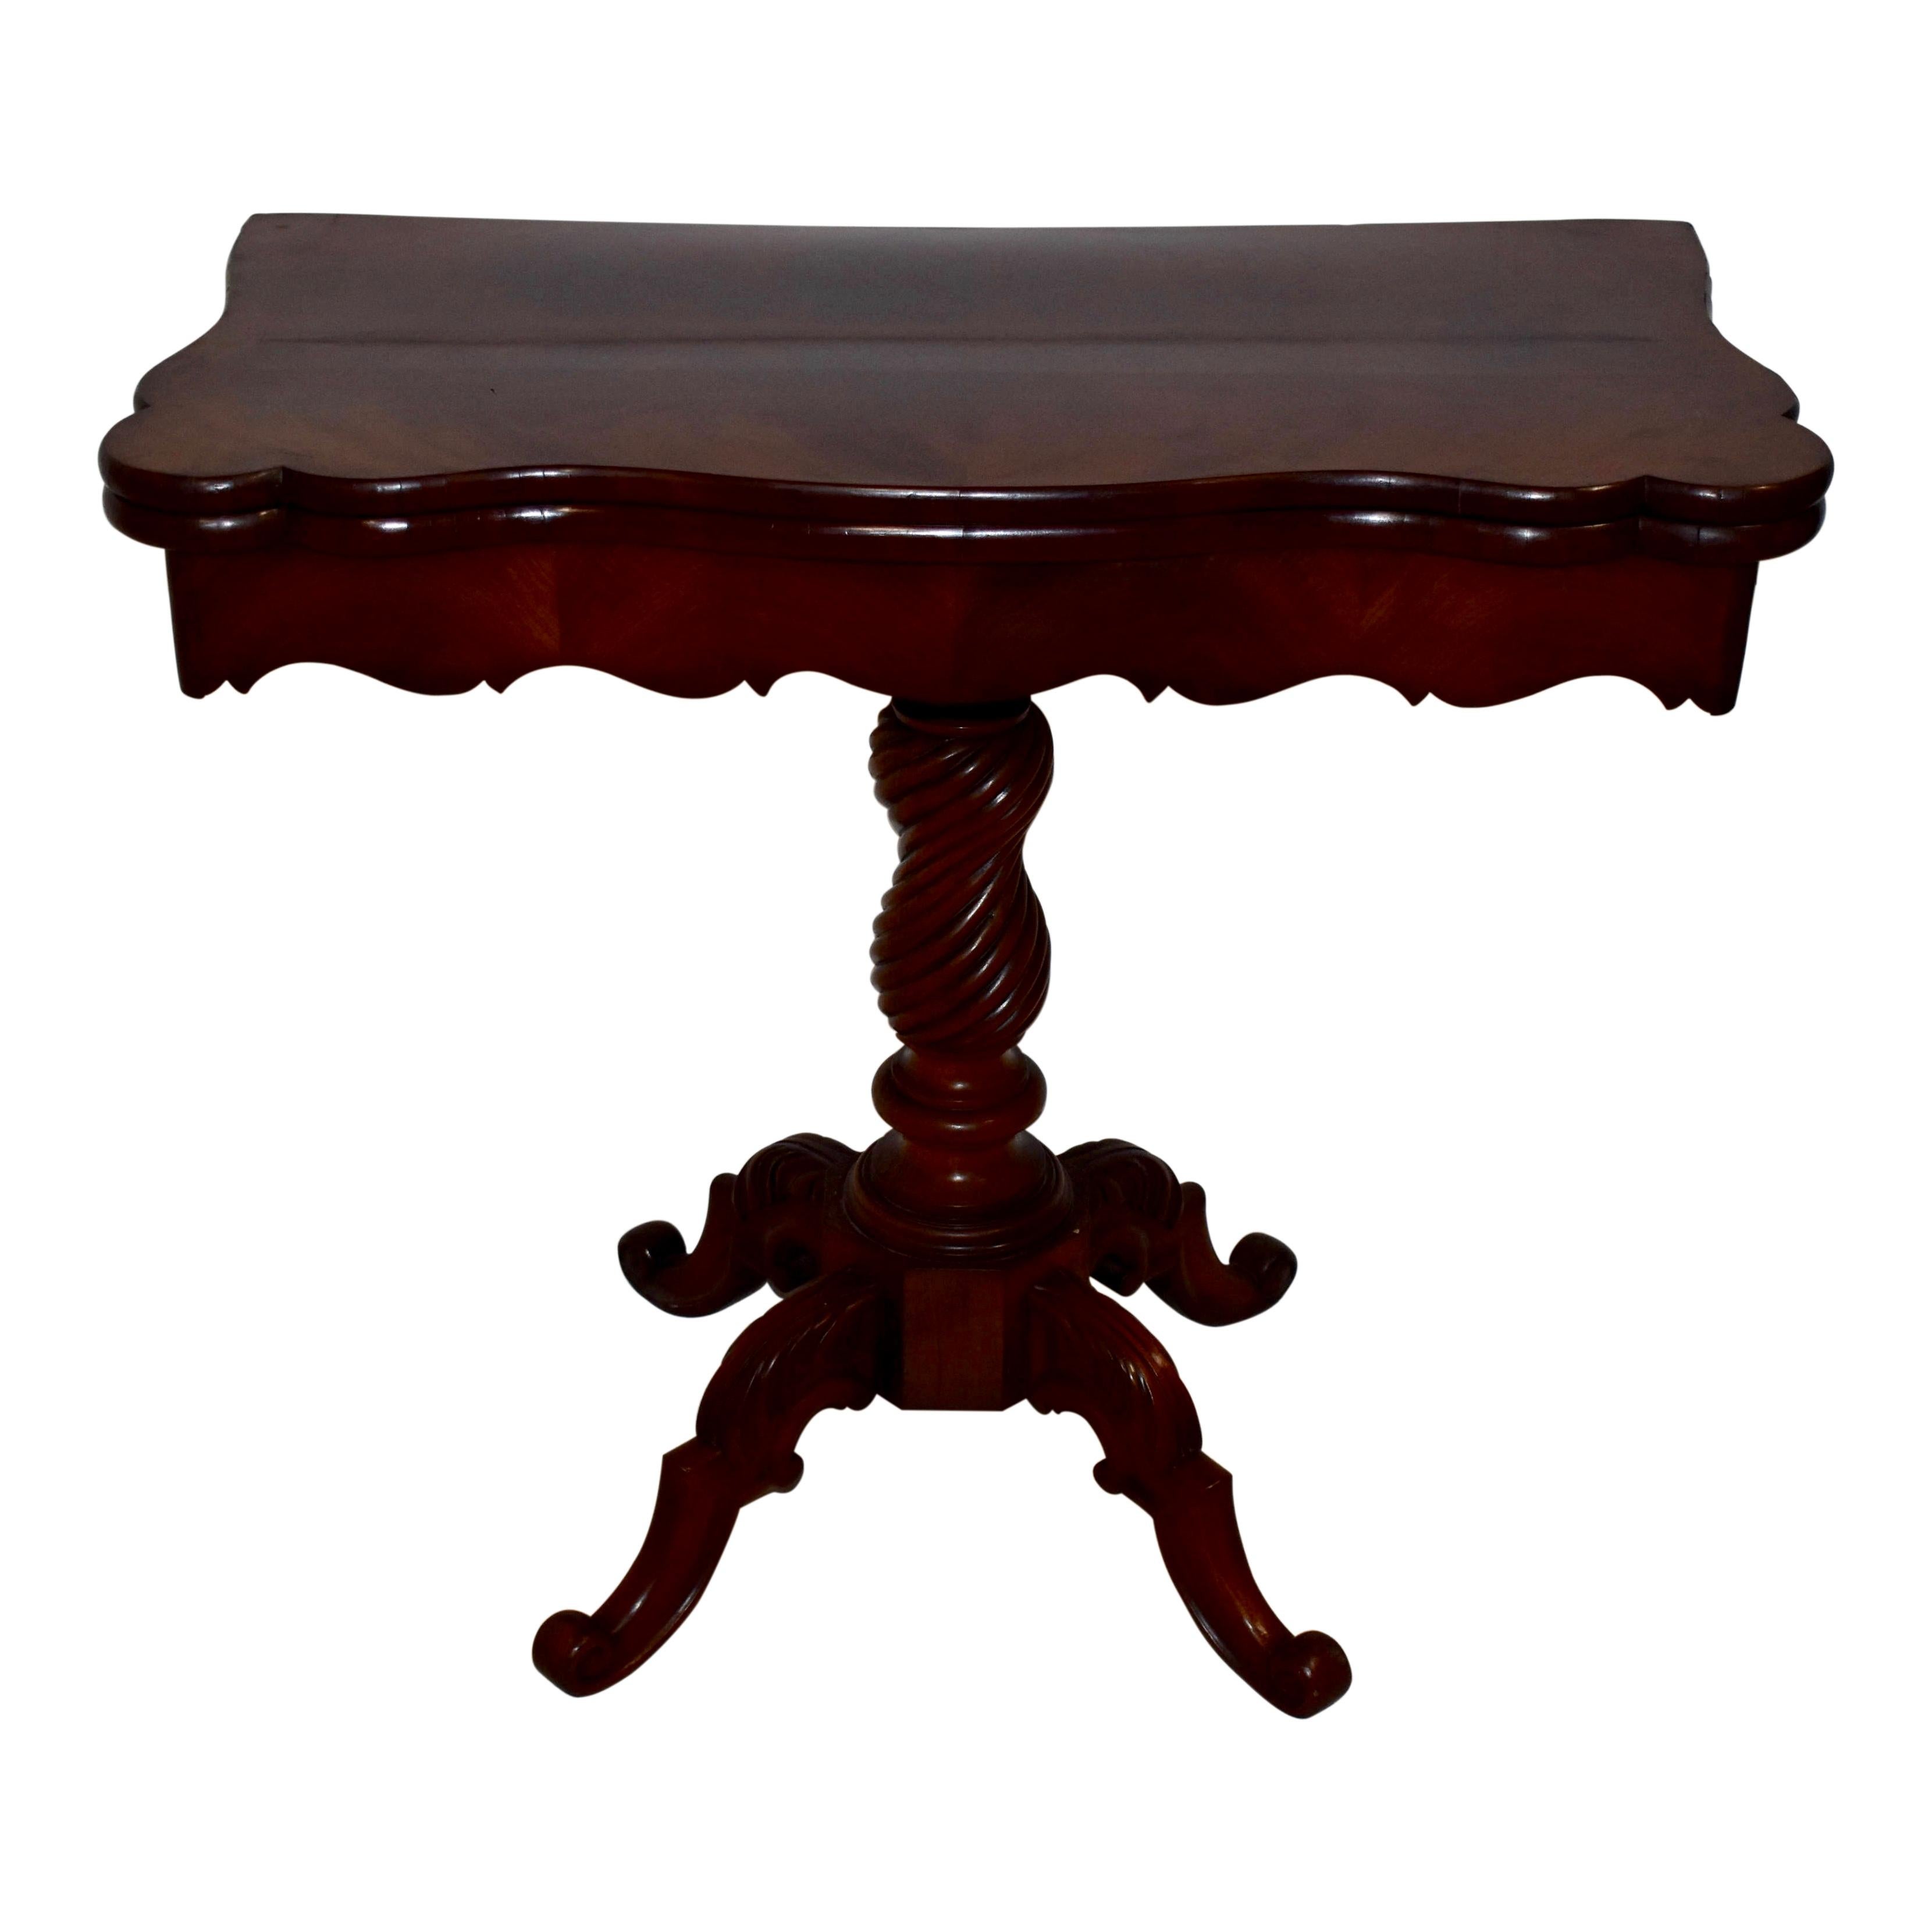 Versatile and functional, this mahogany game table features a hinged top that easily lifts on one side and pivots to open or folds to close. The table offers storage for your favorite games in the scalloped, rectangular base below the top. When